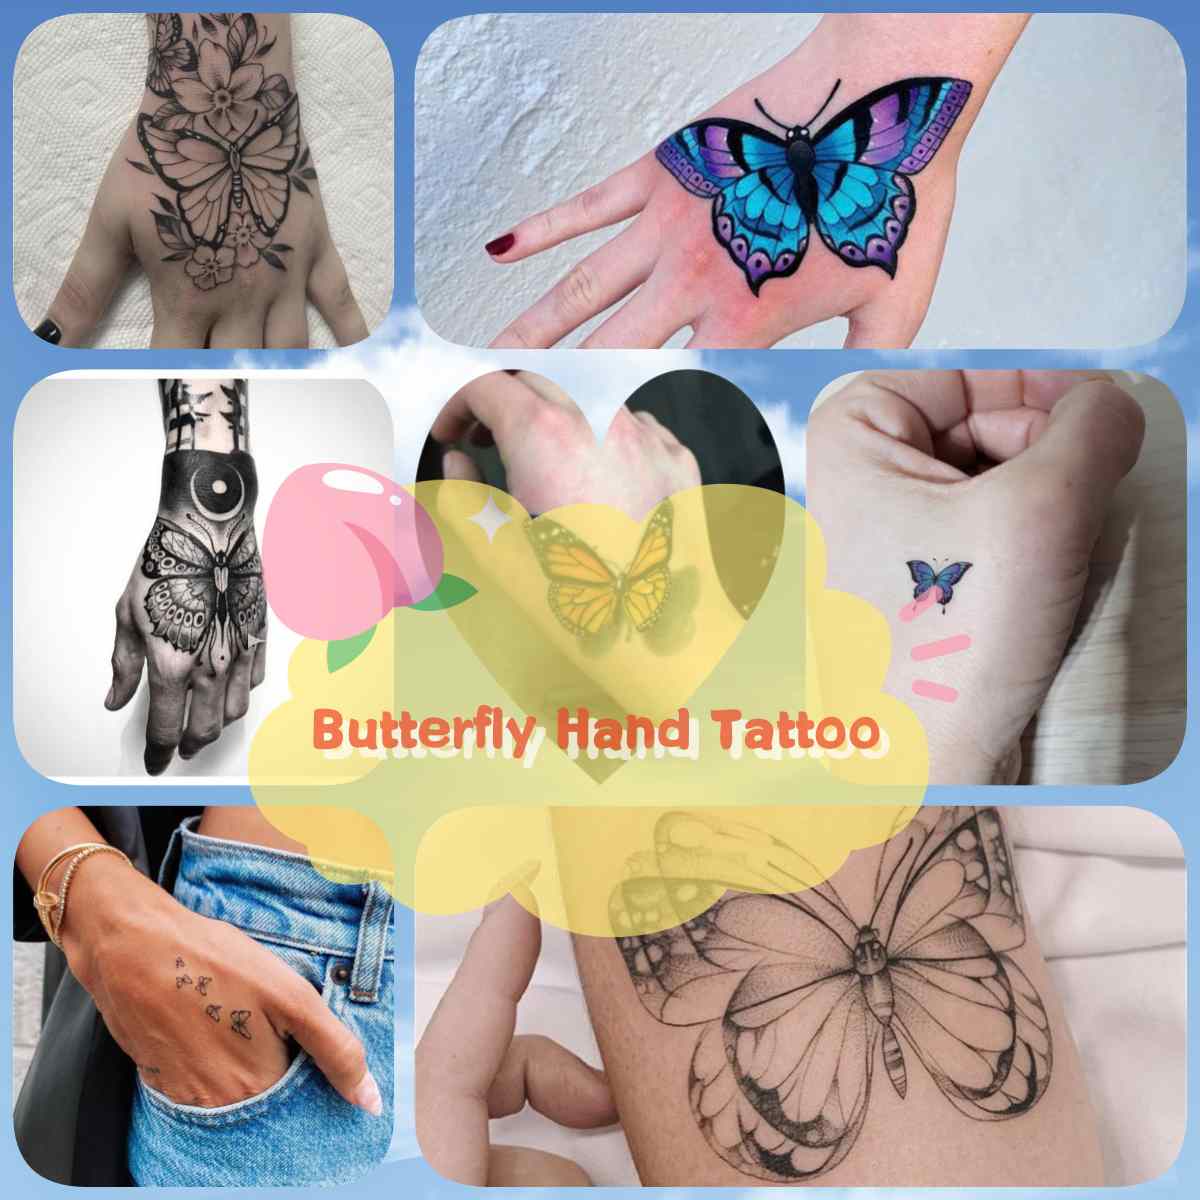 Amazoncom  Temporary Tattoos for Adult Women  2 Sheets  Black Big Snake  Butterfly Lotus Mandala Medallion Sexy Small Butterflies Sleeve Words  Adults Tattoo  Beauty  Personal Care